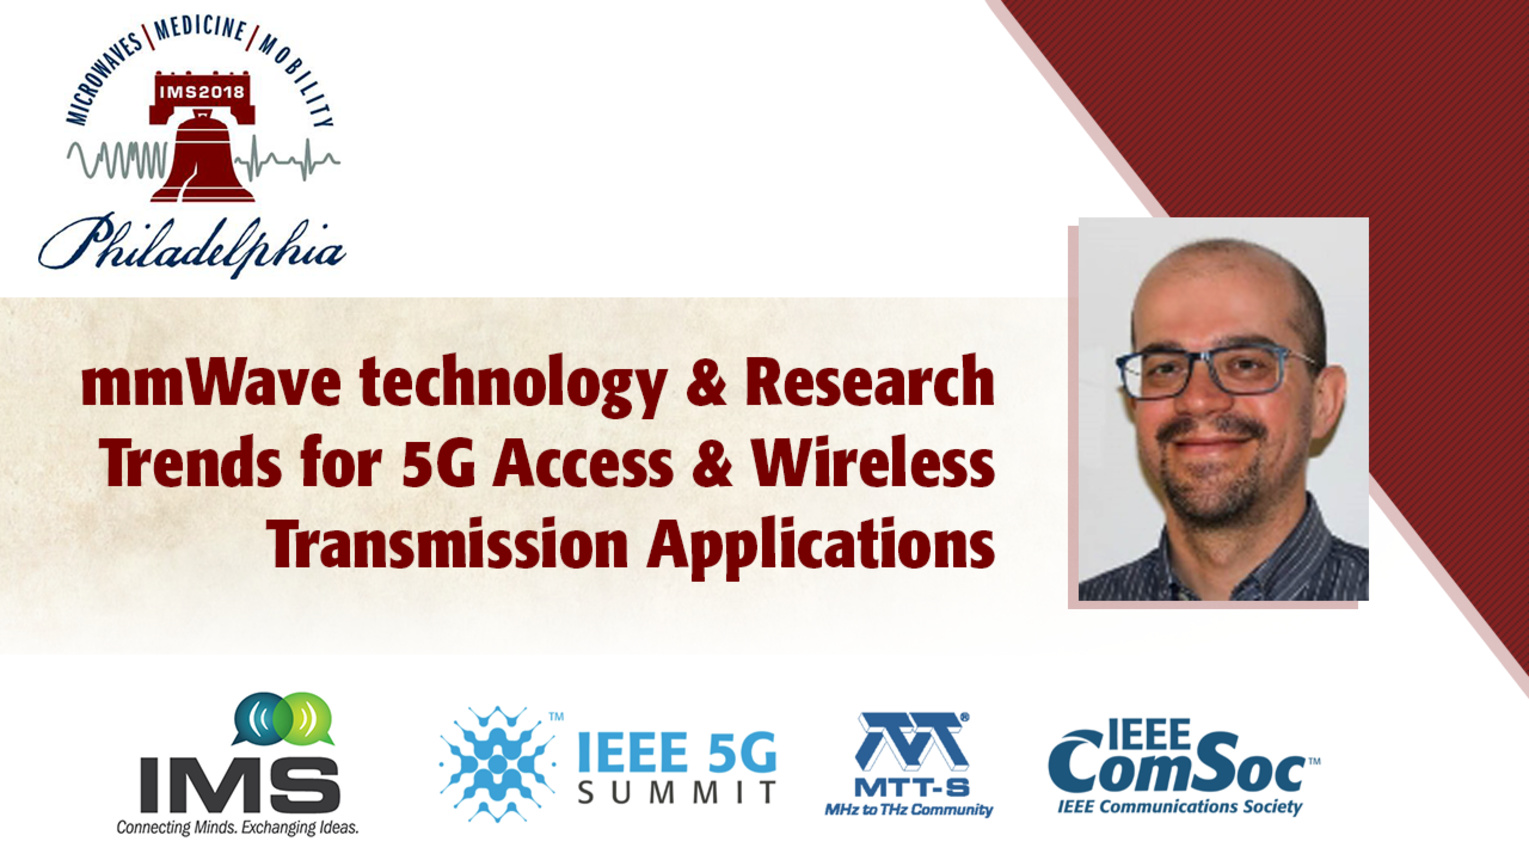 'Millimeter-wave technology and research trends for 5G Access and Wireless Transmission applications - An industry view'